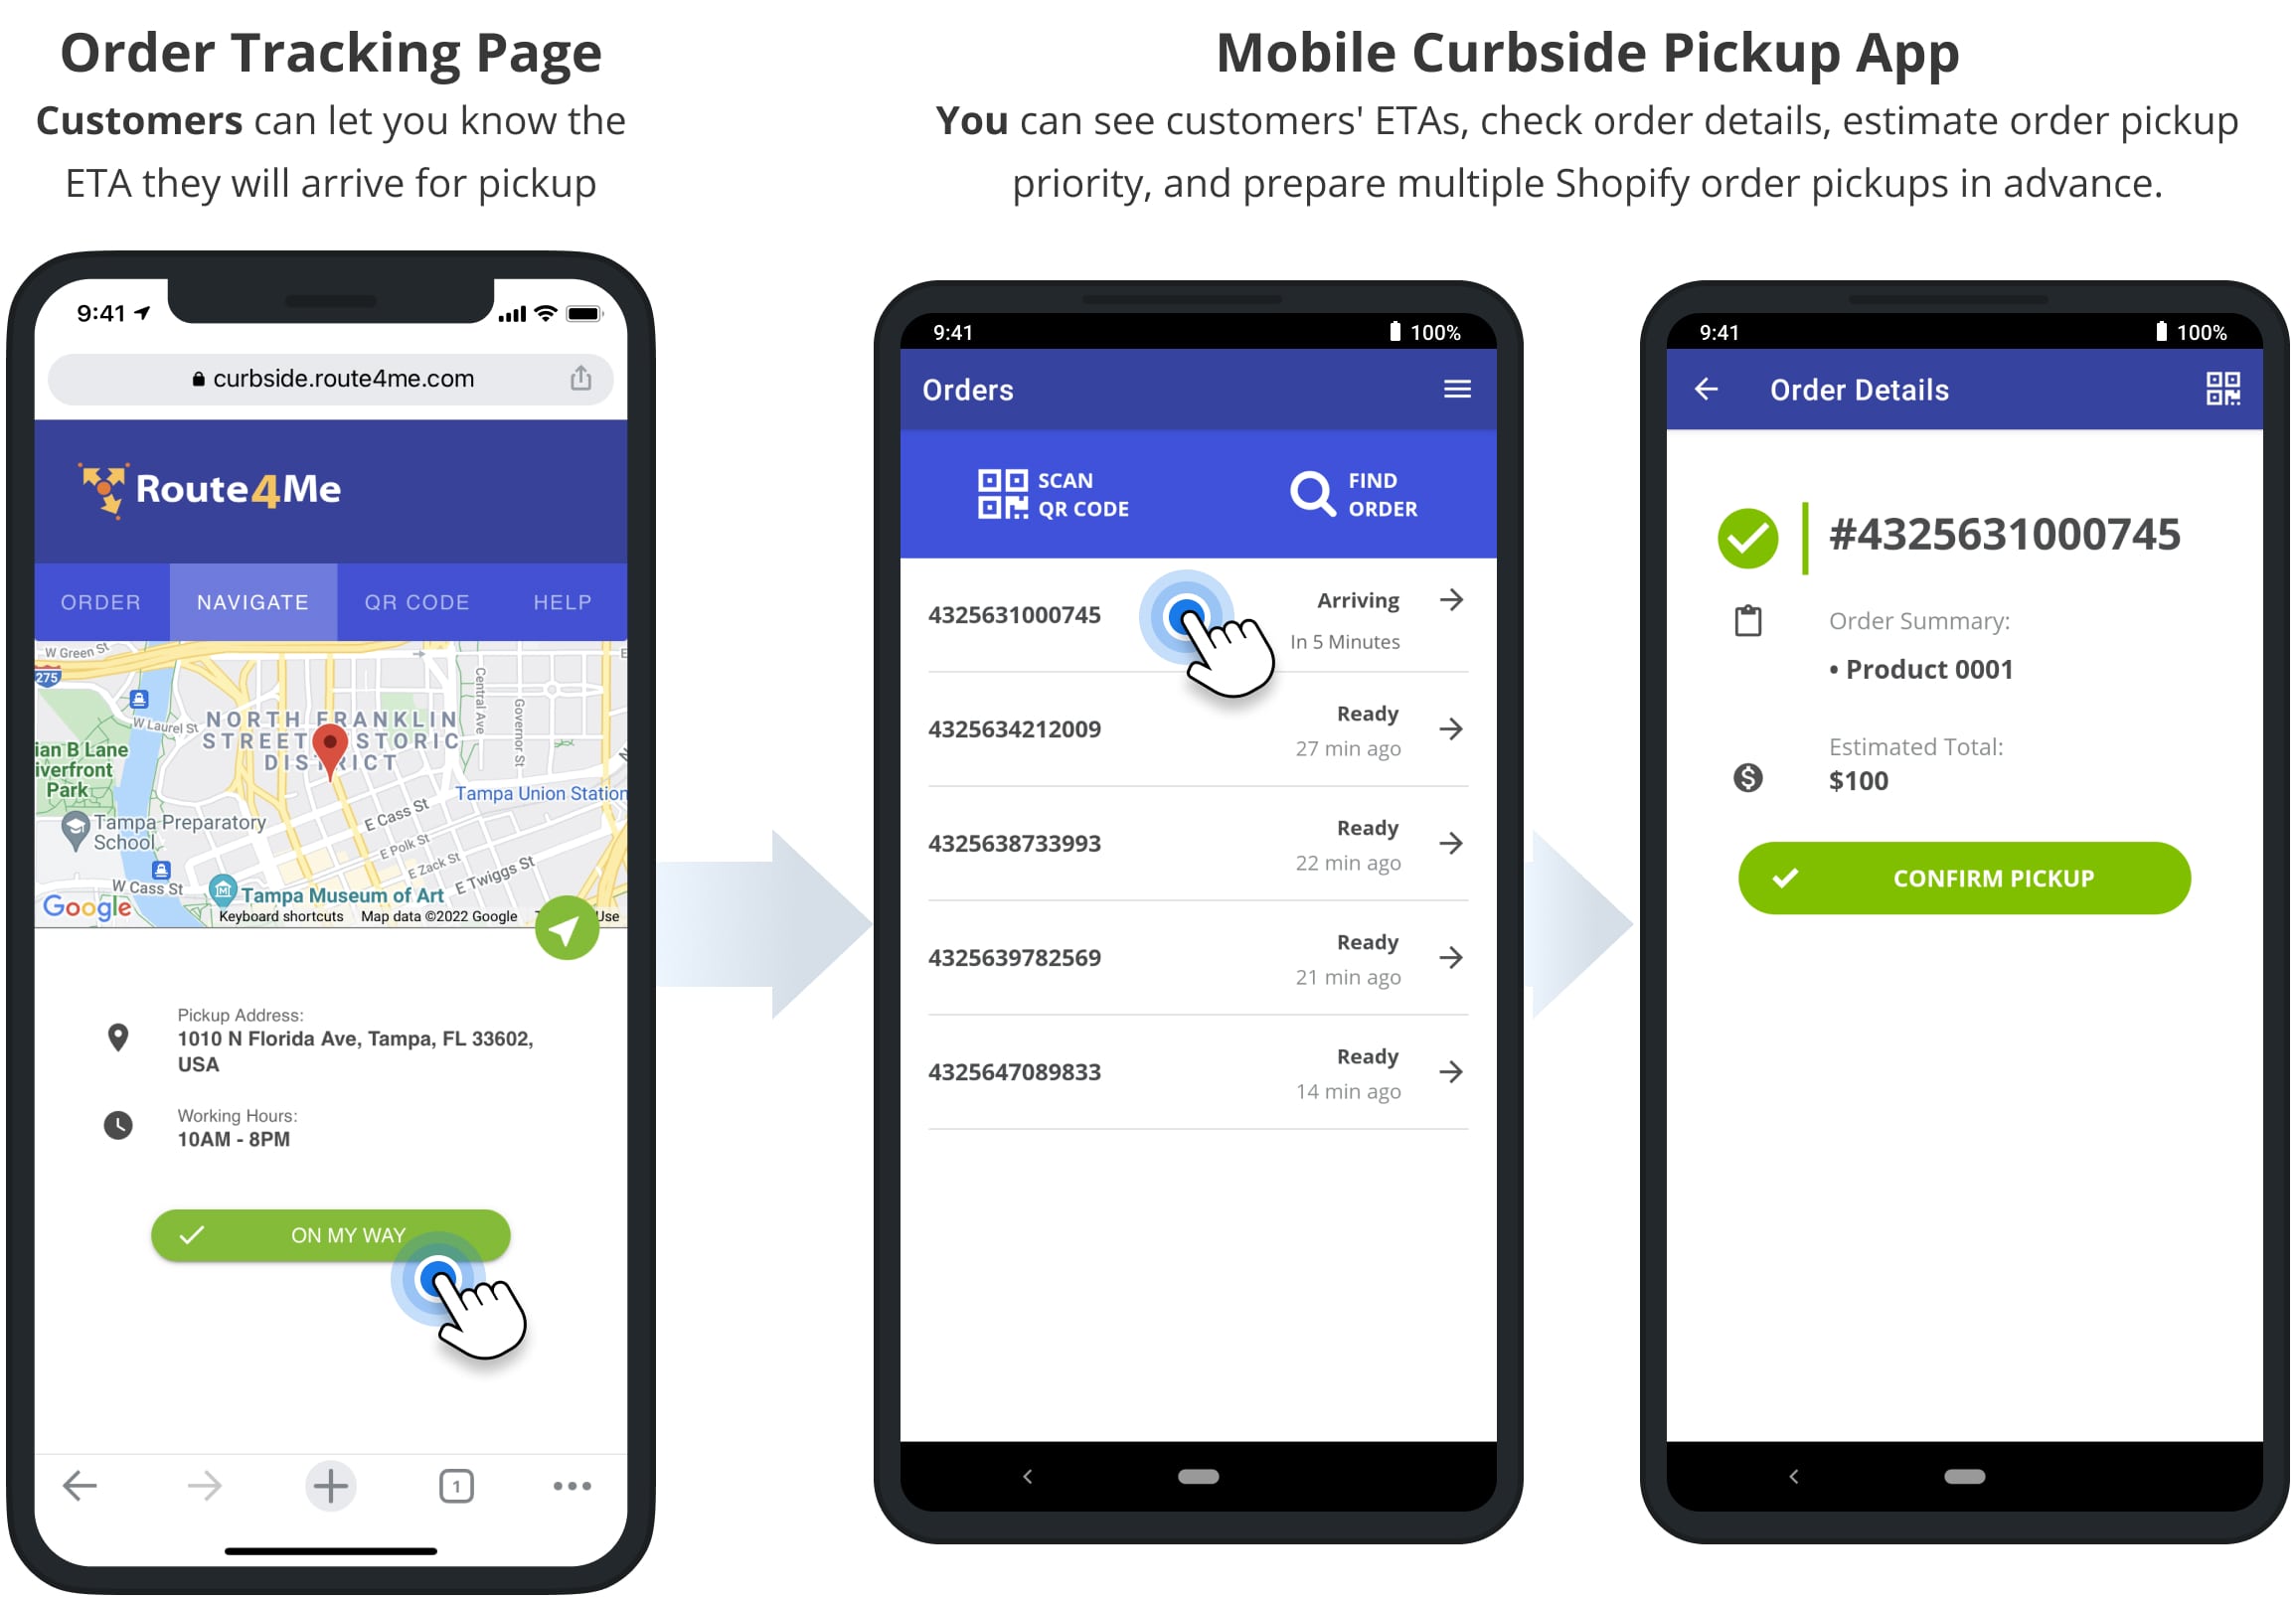 Customers add the ETA they will arrive for Shopify order pickup, and the arrival status is updated in the Mobile Curbside Pickup app.